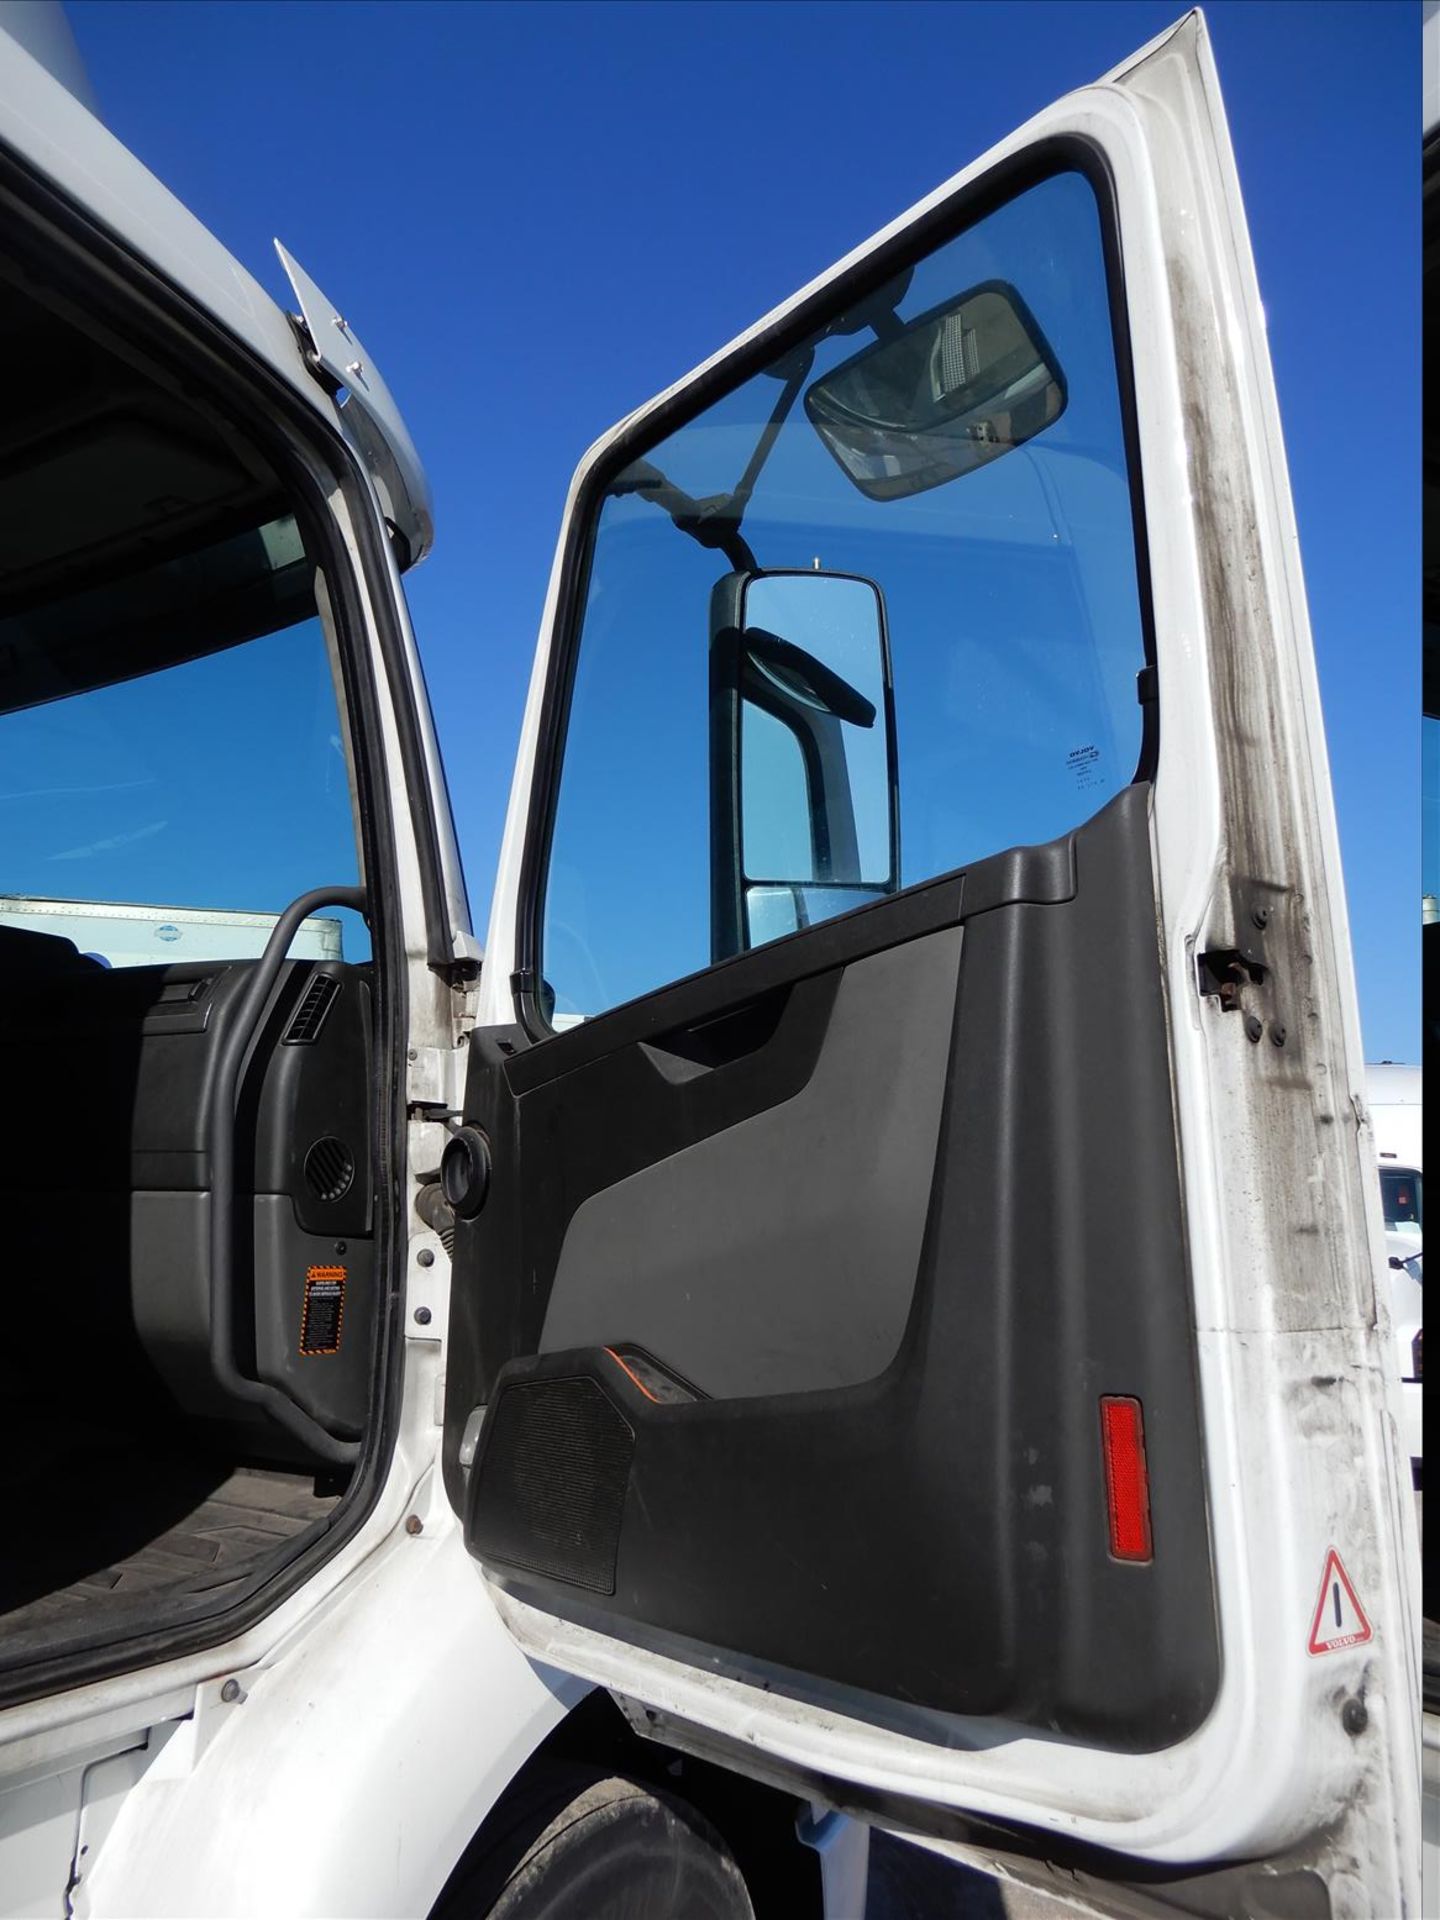 2019 Volvo VNR 300 Daycab Truck Tractor - Located in Indianapolis, IN - Image 35 of 61